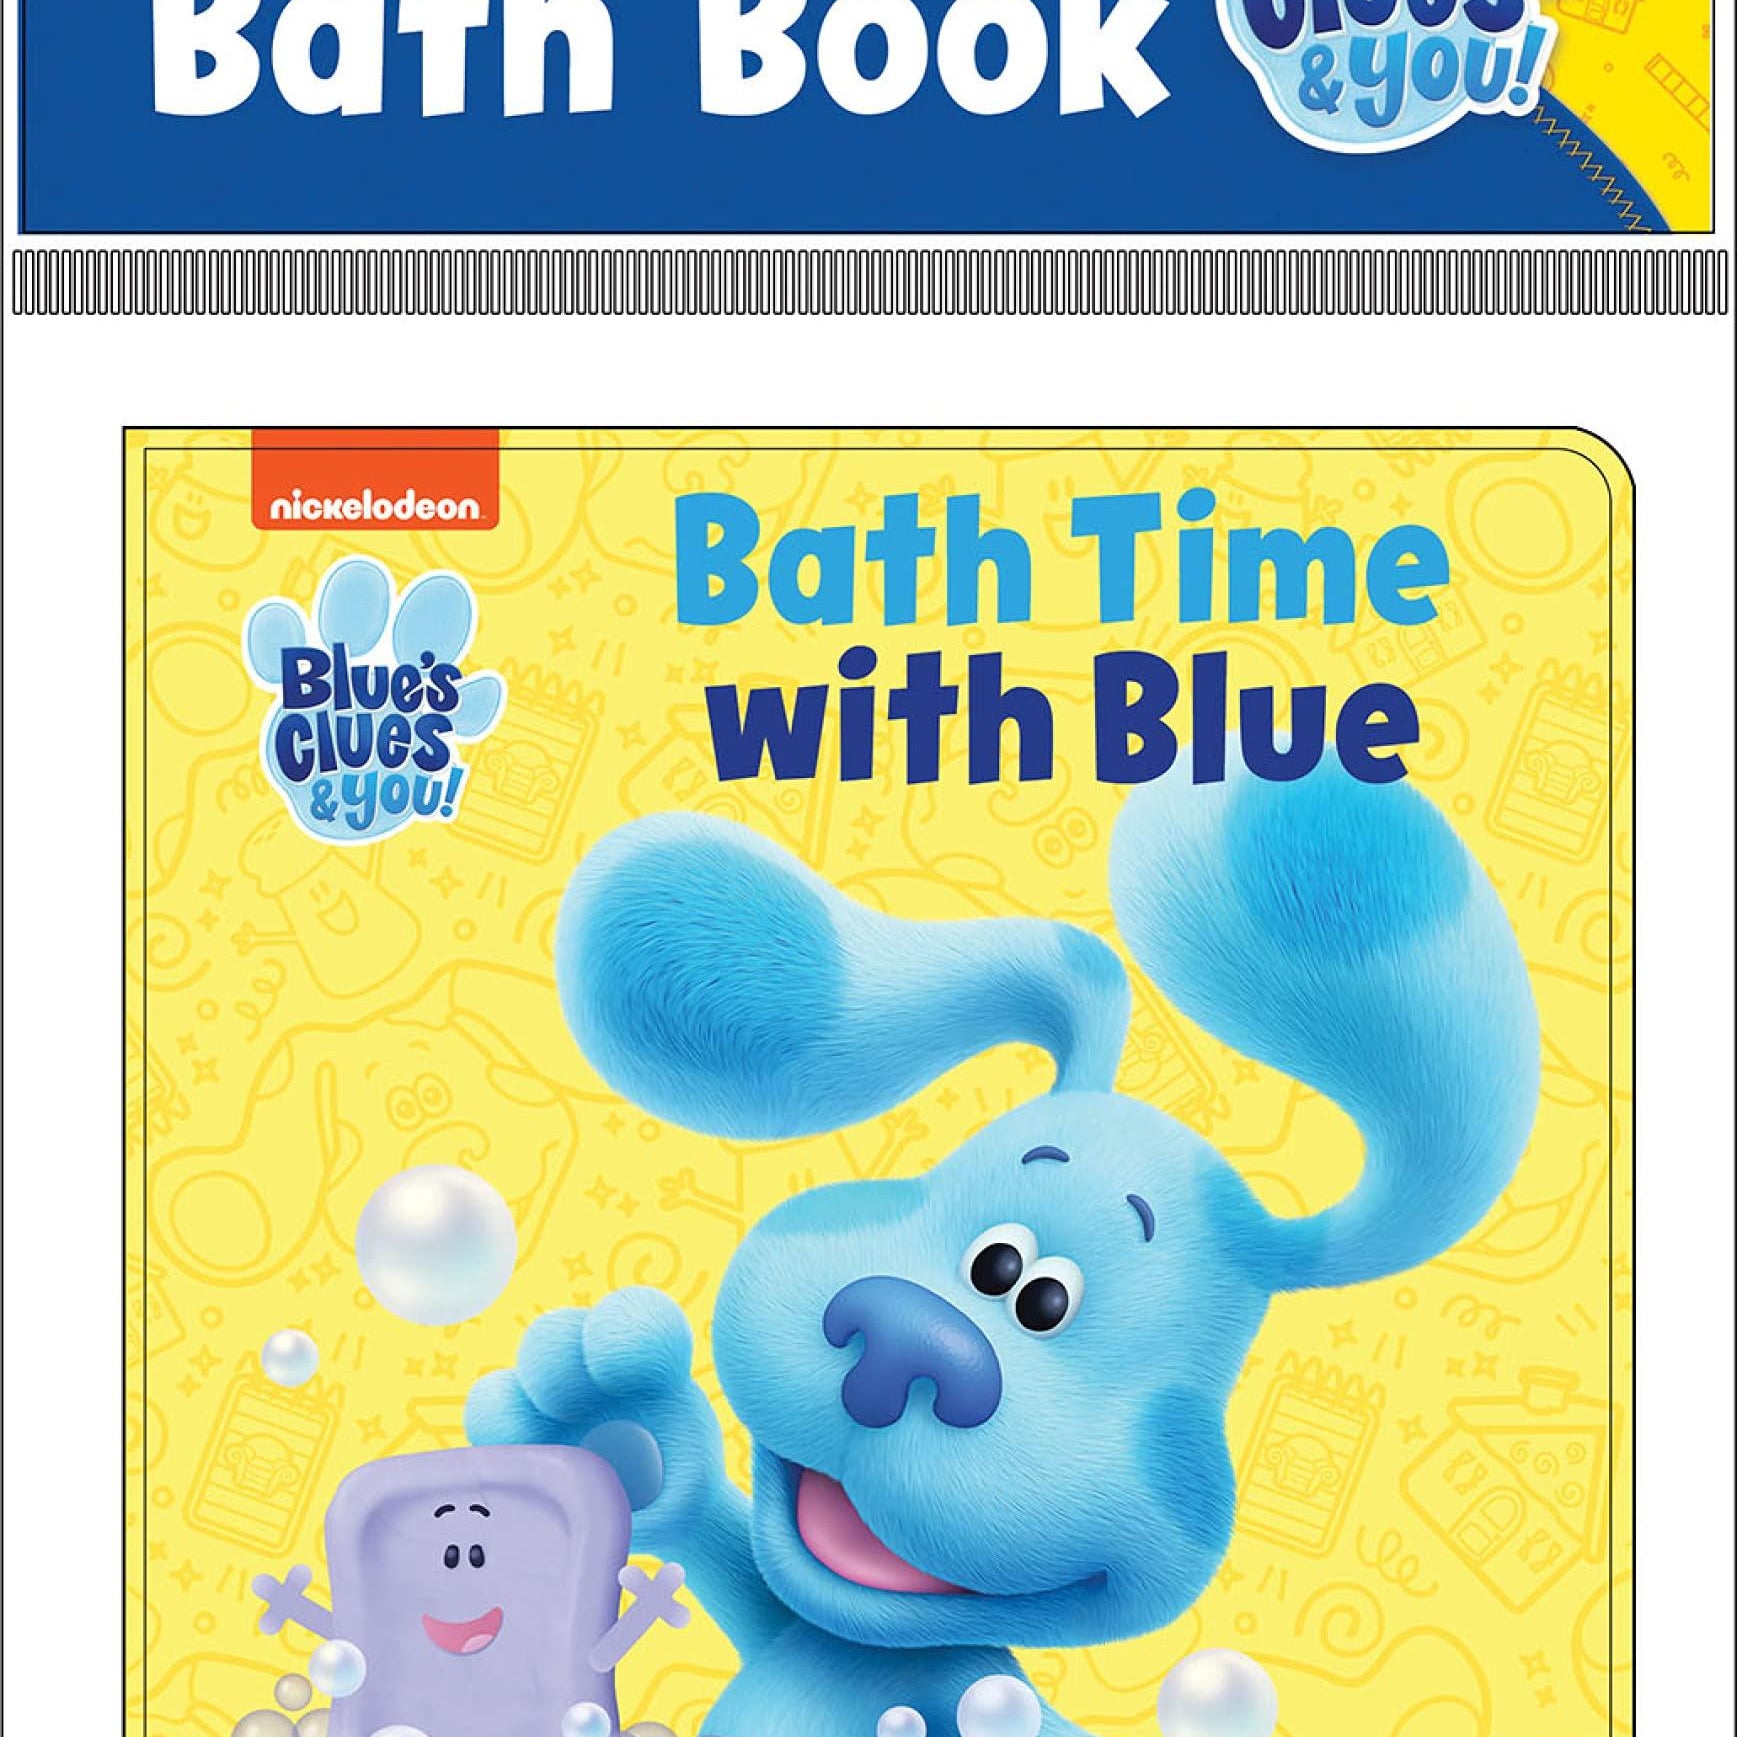 Blue's Clues & you! - Bath Time with Blue - Waterproof Bath Book / Bath Toy - Ourkids - OKO